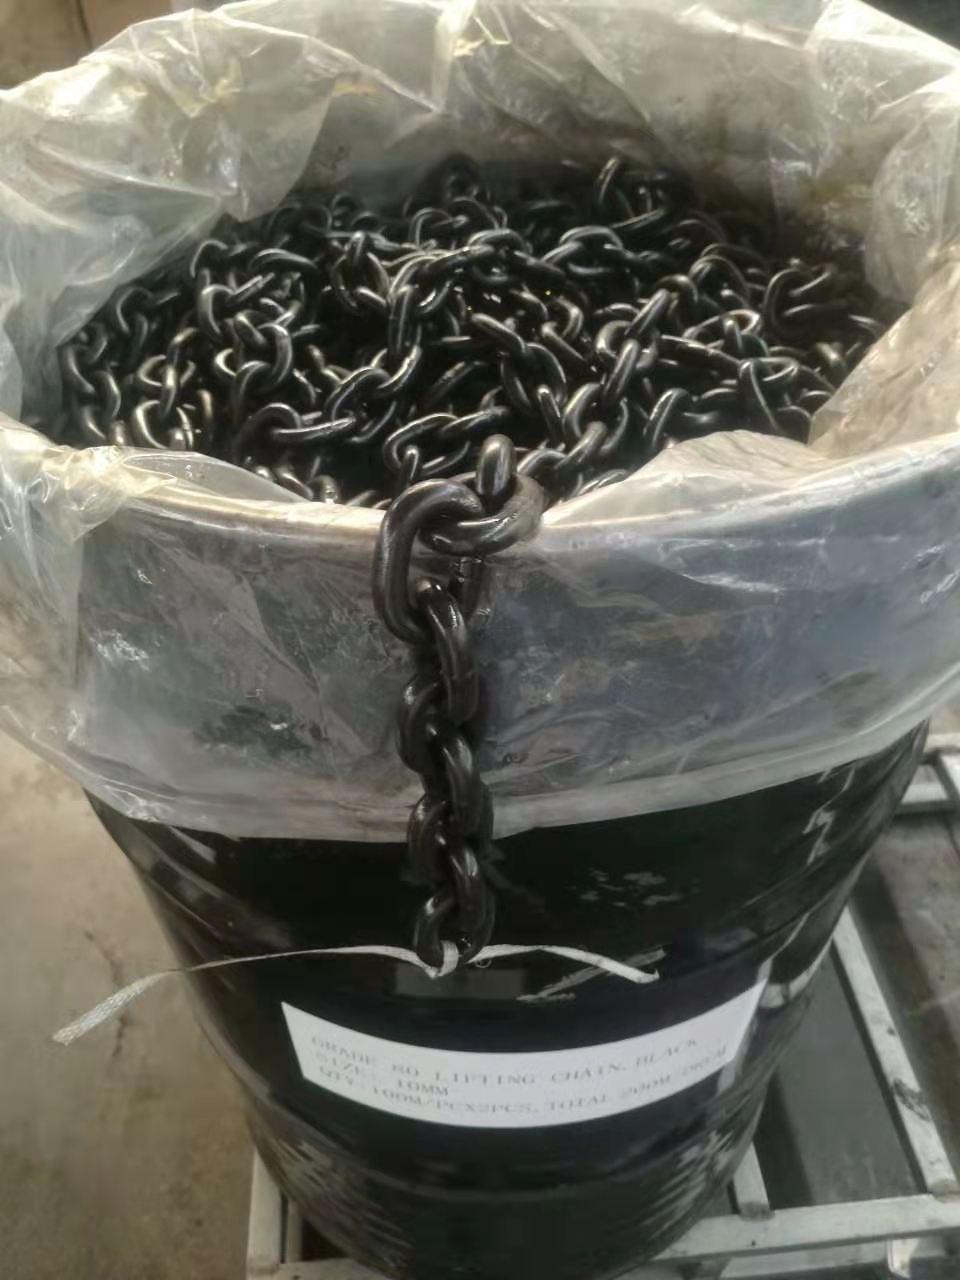 New Model Link Lifting Chain for Sale (K2255)